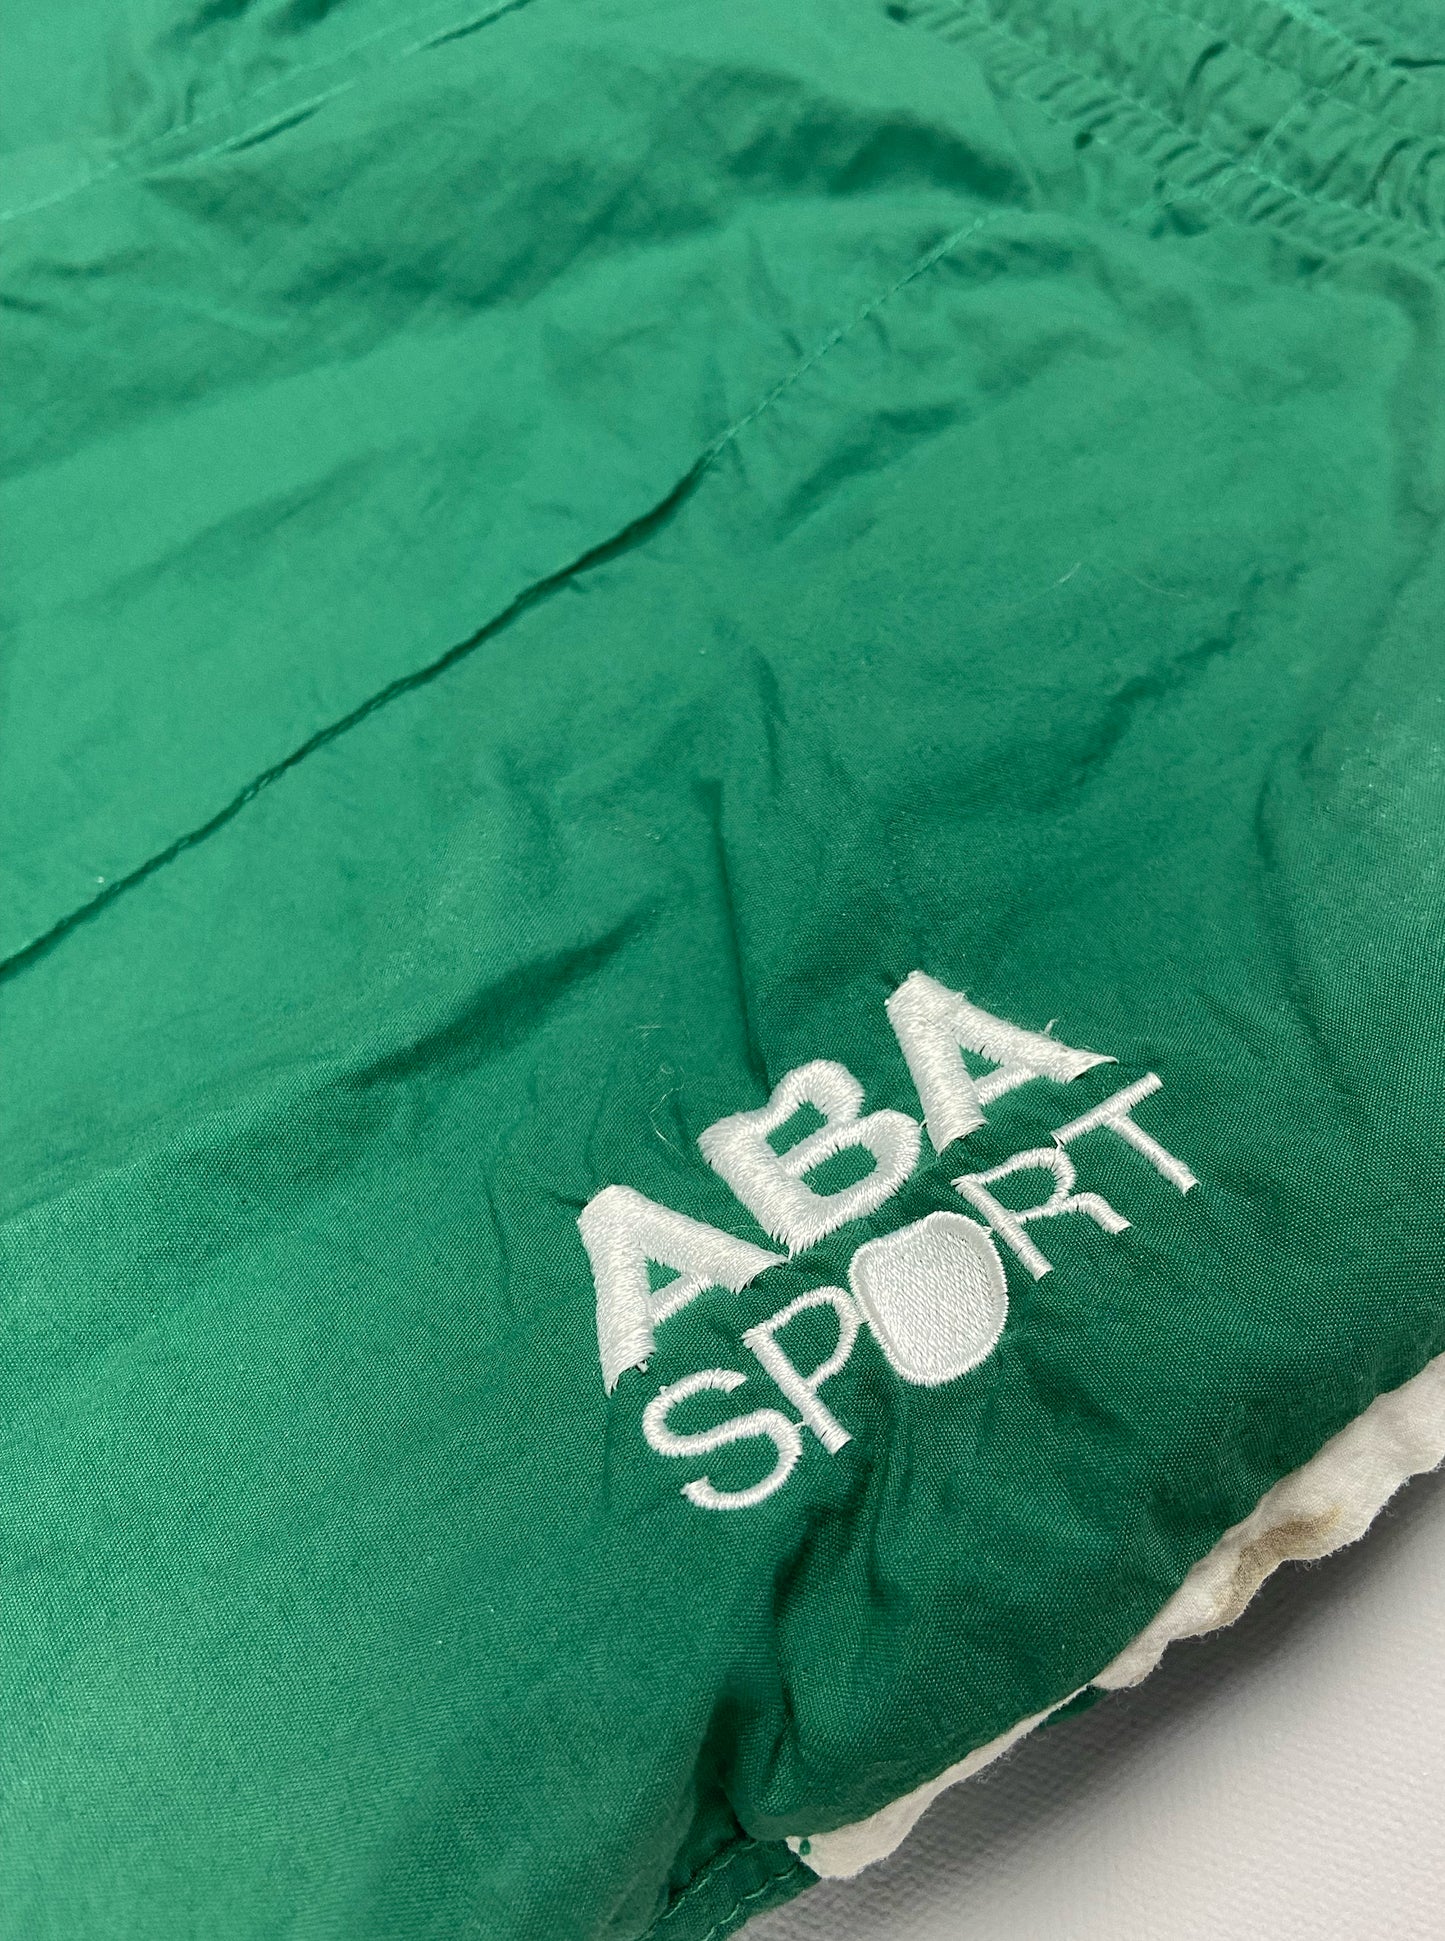 1998 MEXICO TRACKSUIT BOTTOMS (XL) ABA SPORT